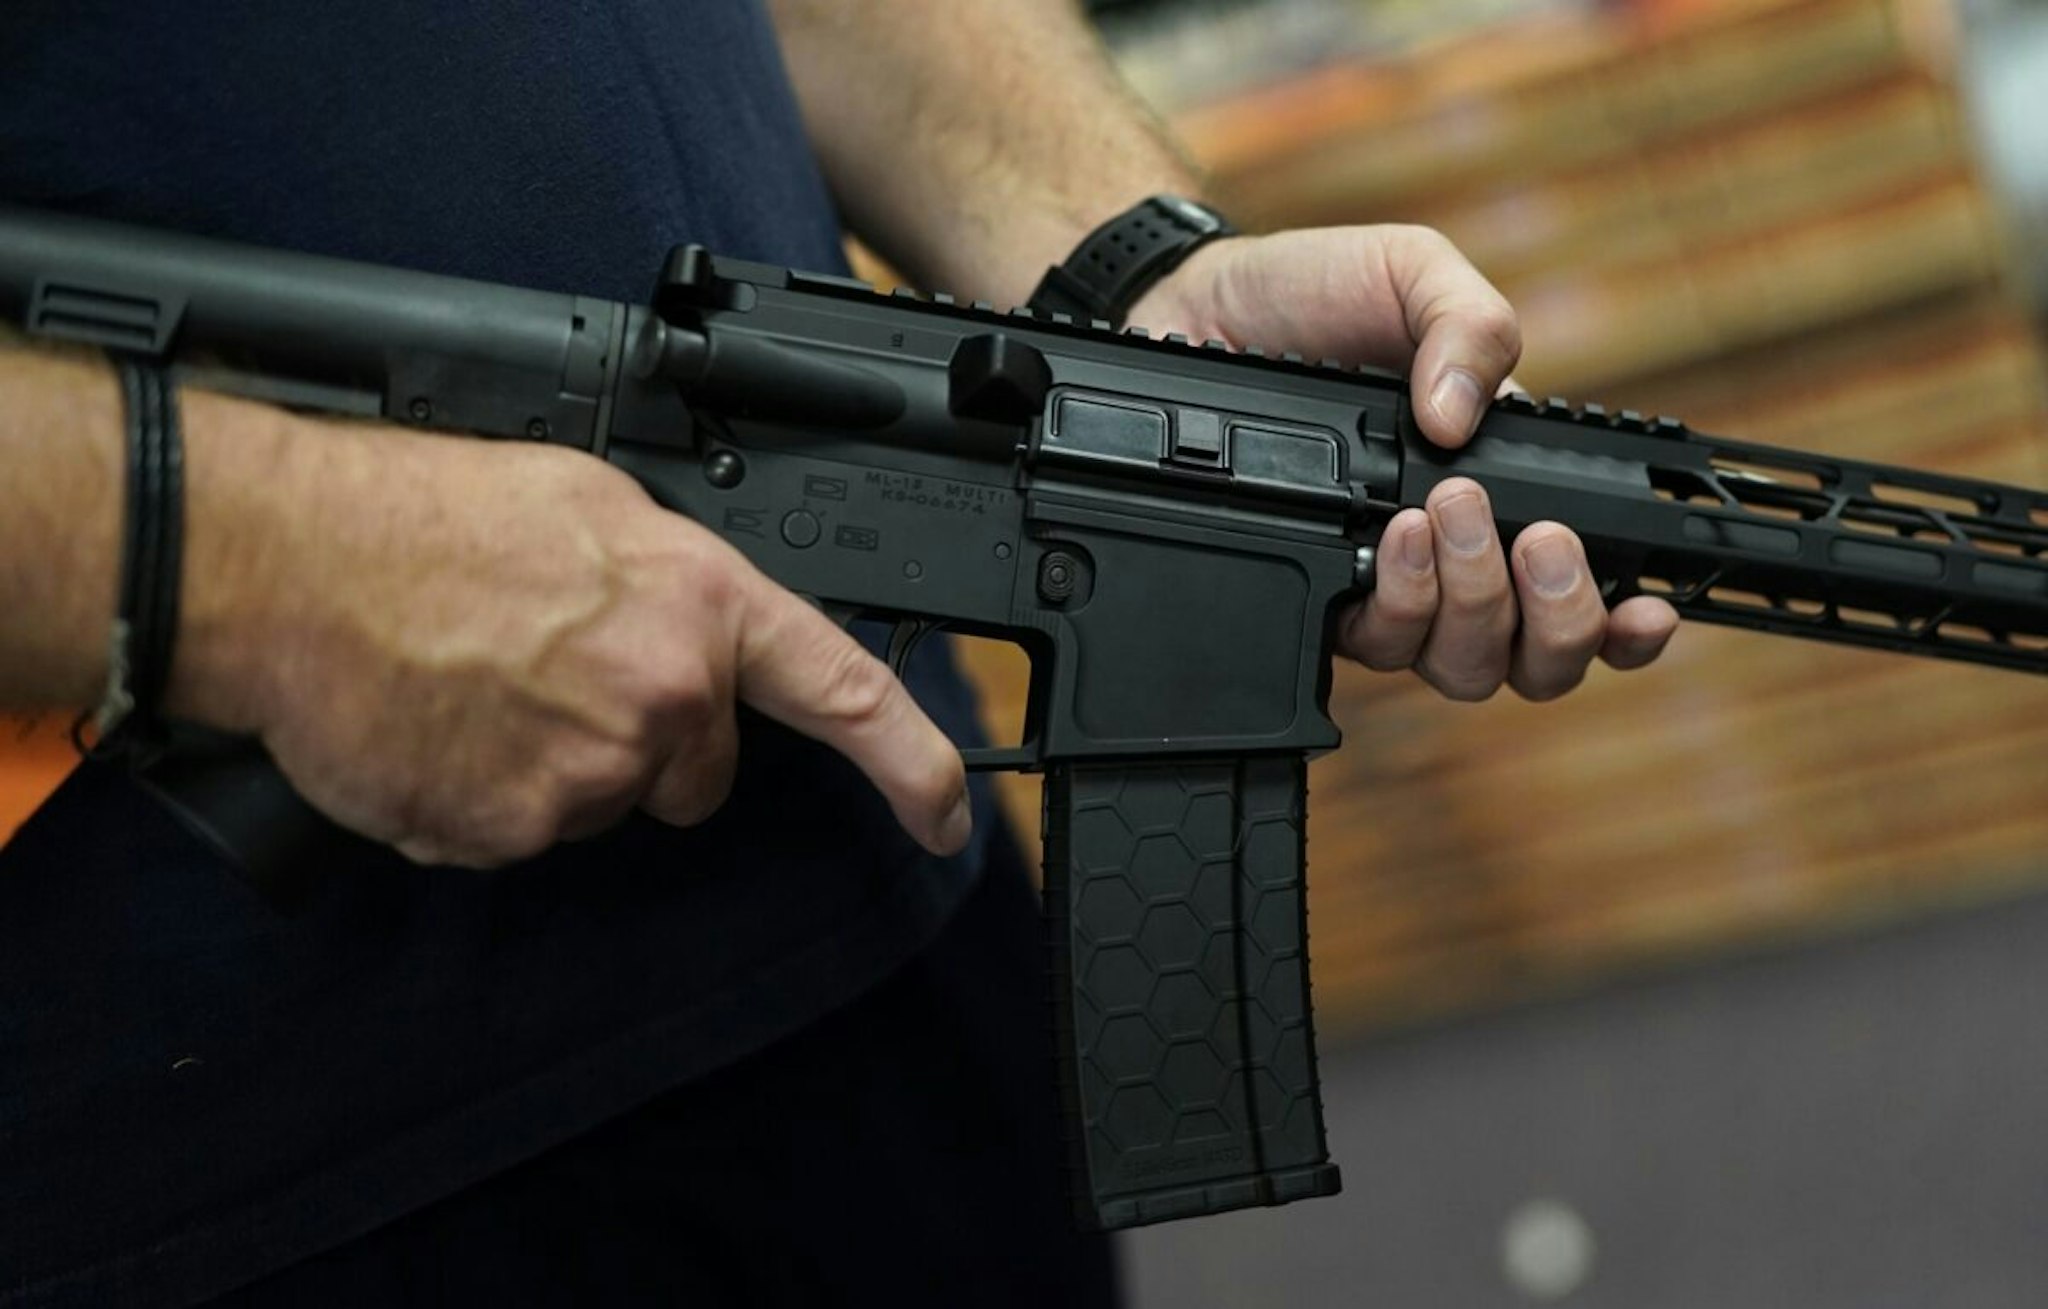 A customer handles an AR-15 at Jimmy's Sport Shop in Mineola, New York on September 25, 2020